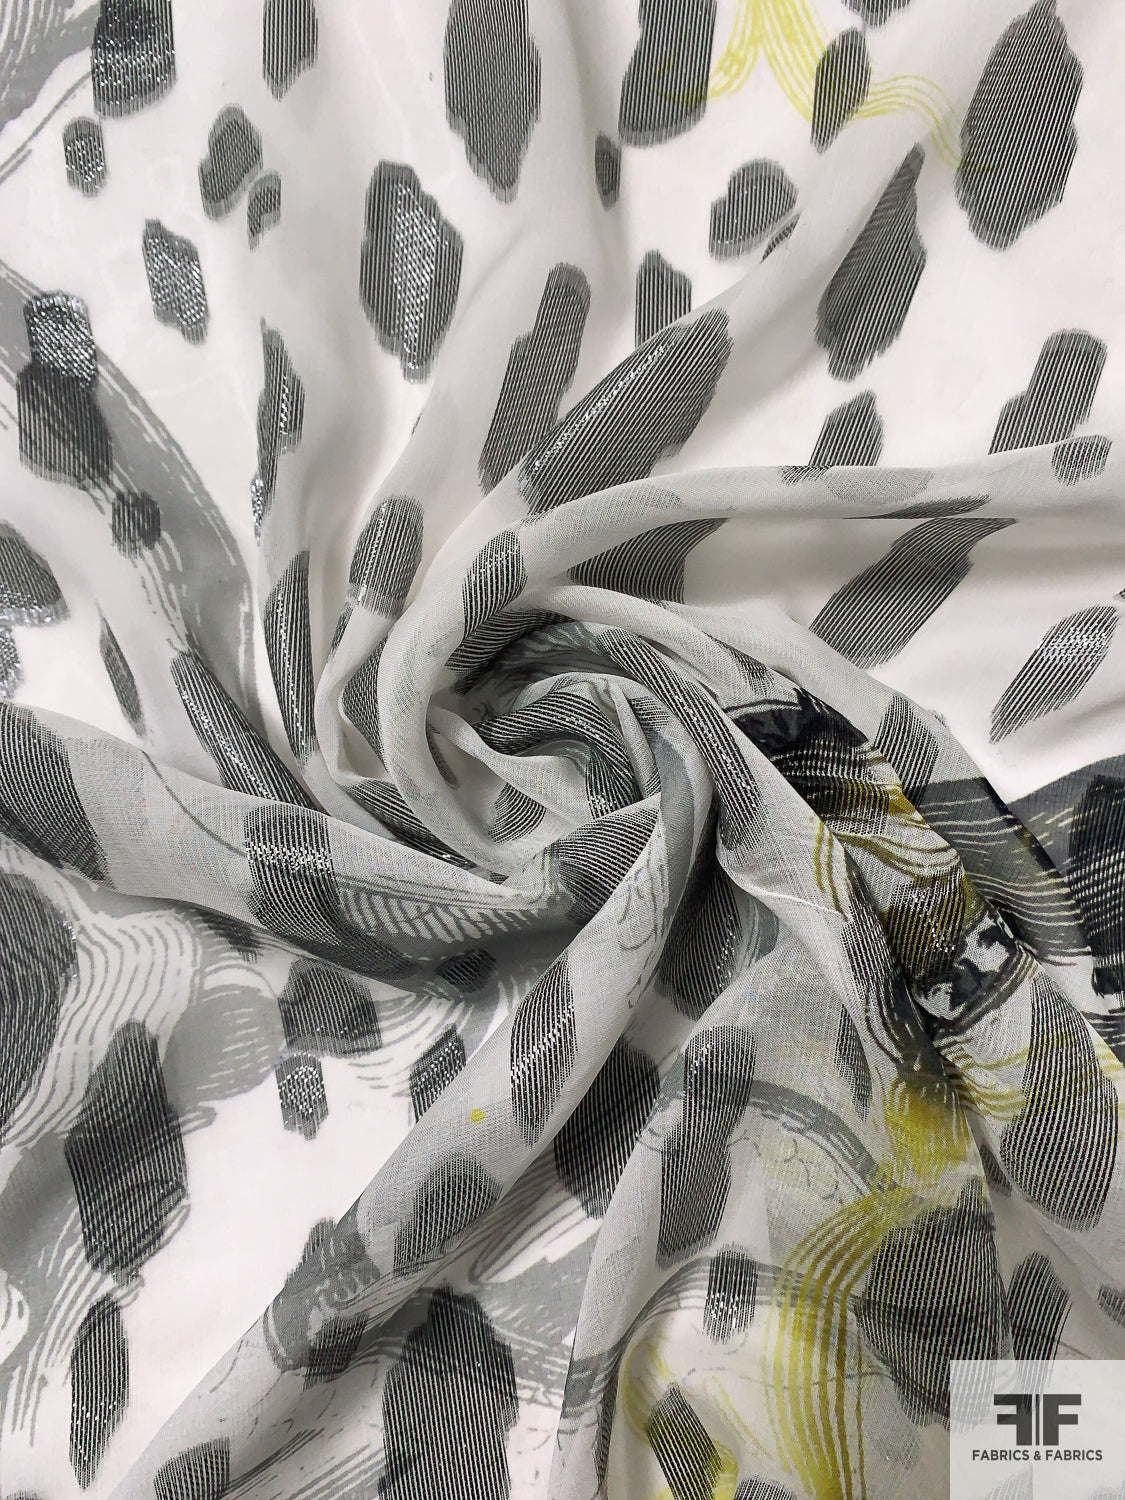 Lurex Spotted and Wispy Stroke Silk Chiffon - Black / Off-White / Chartreuse